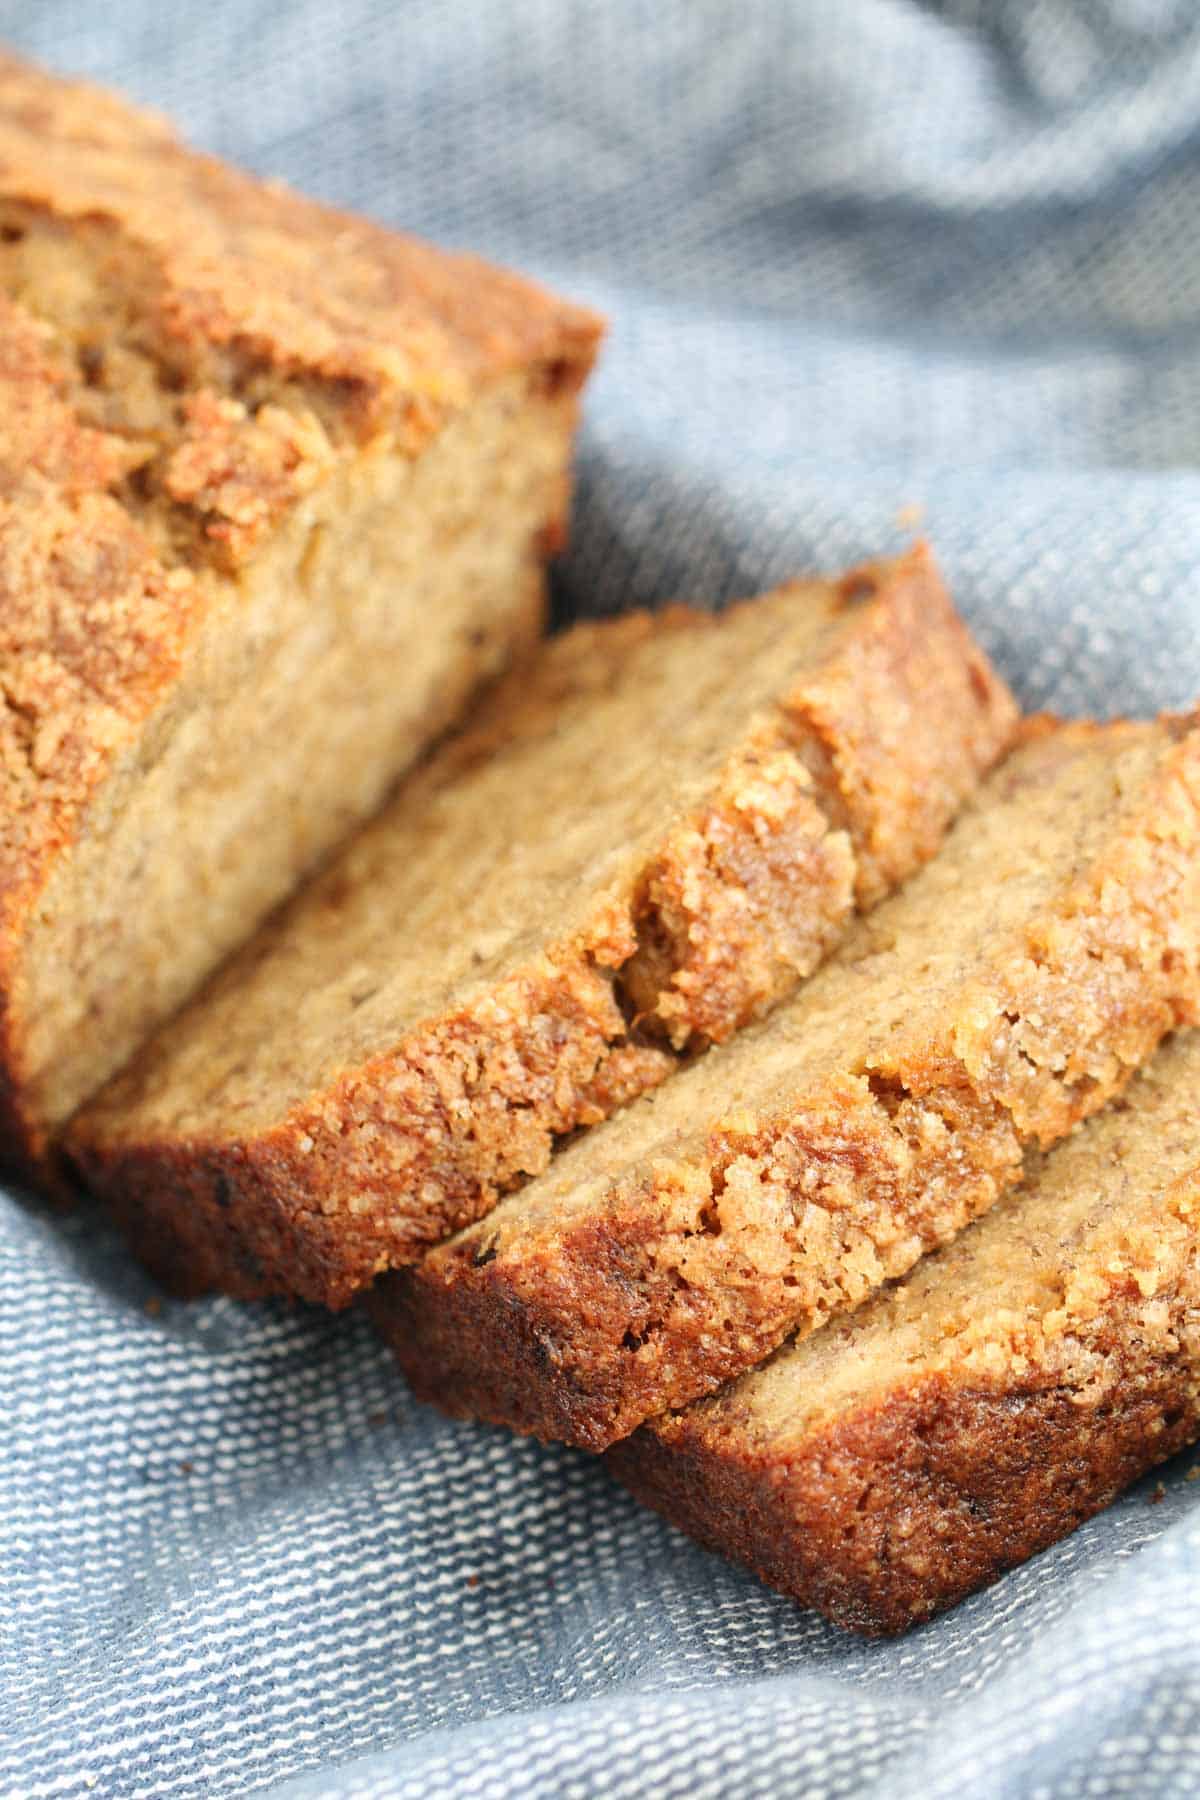 Slices of moist banana bread with a crunchy sugar topping.